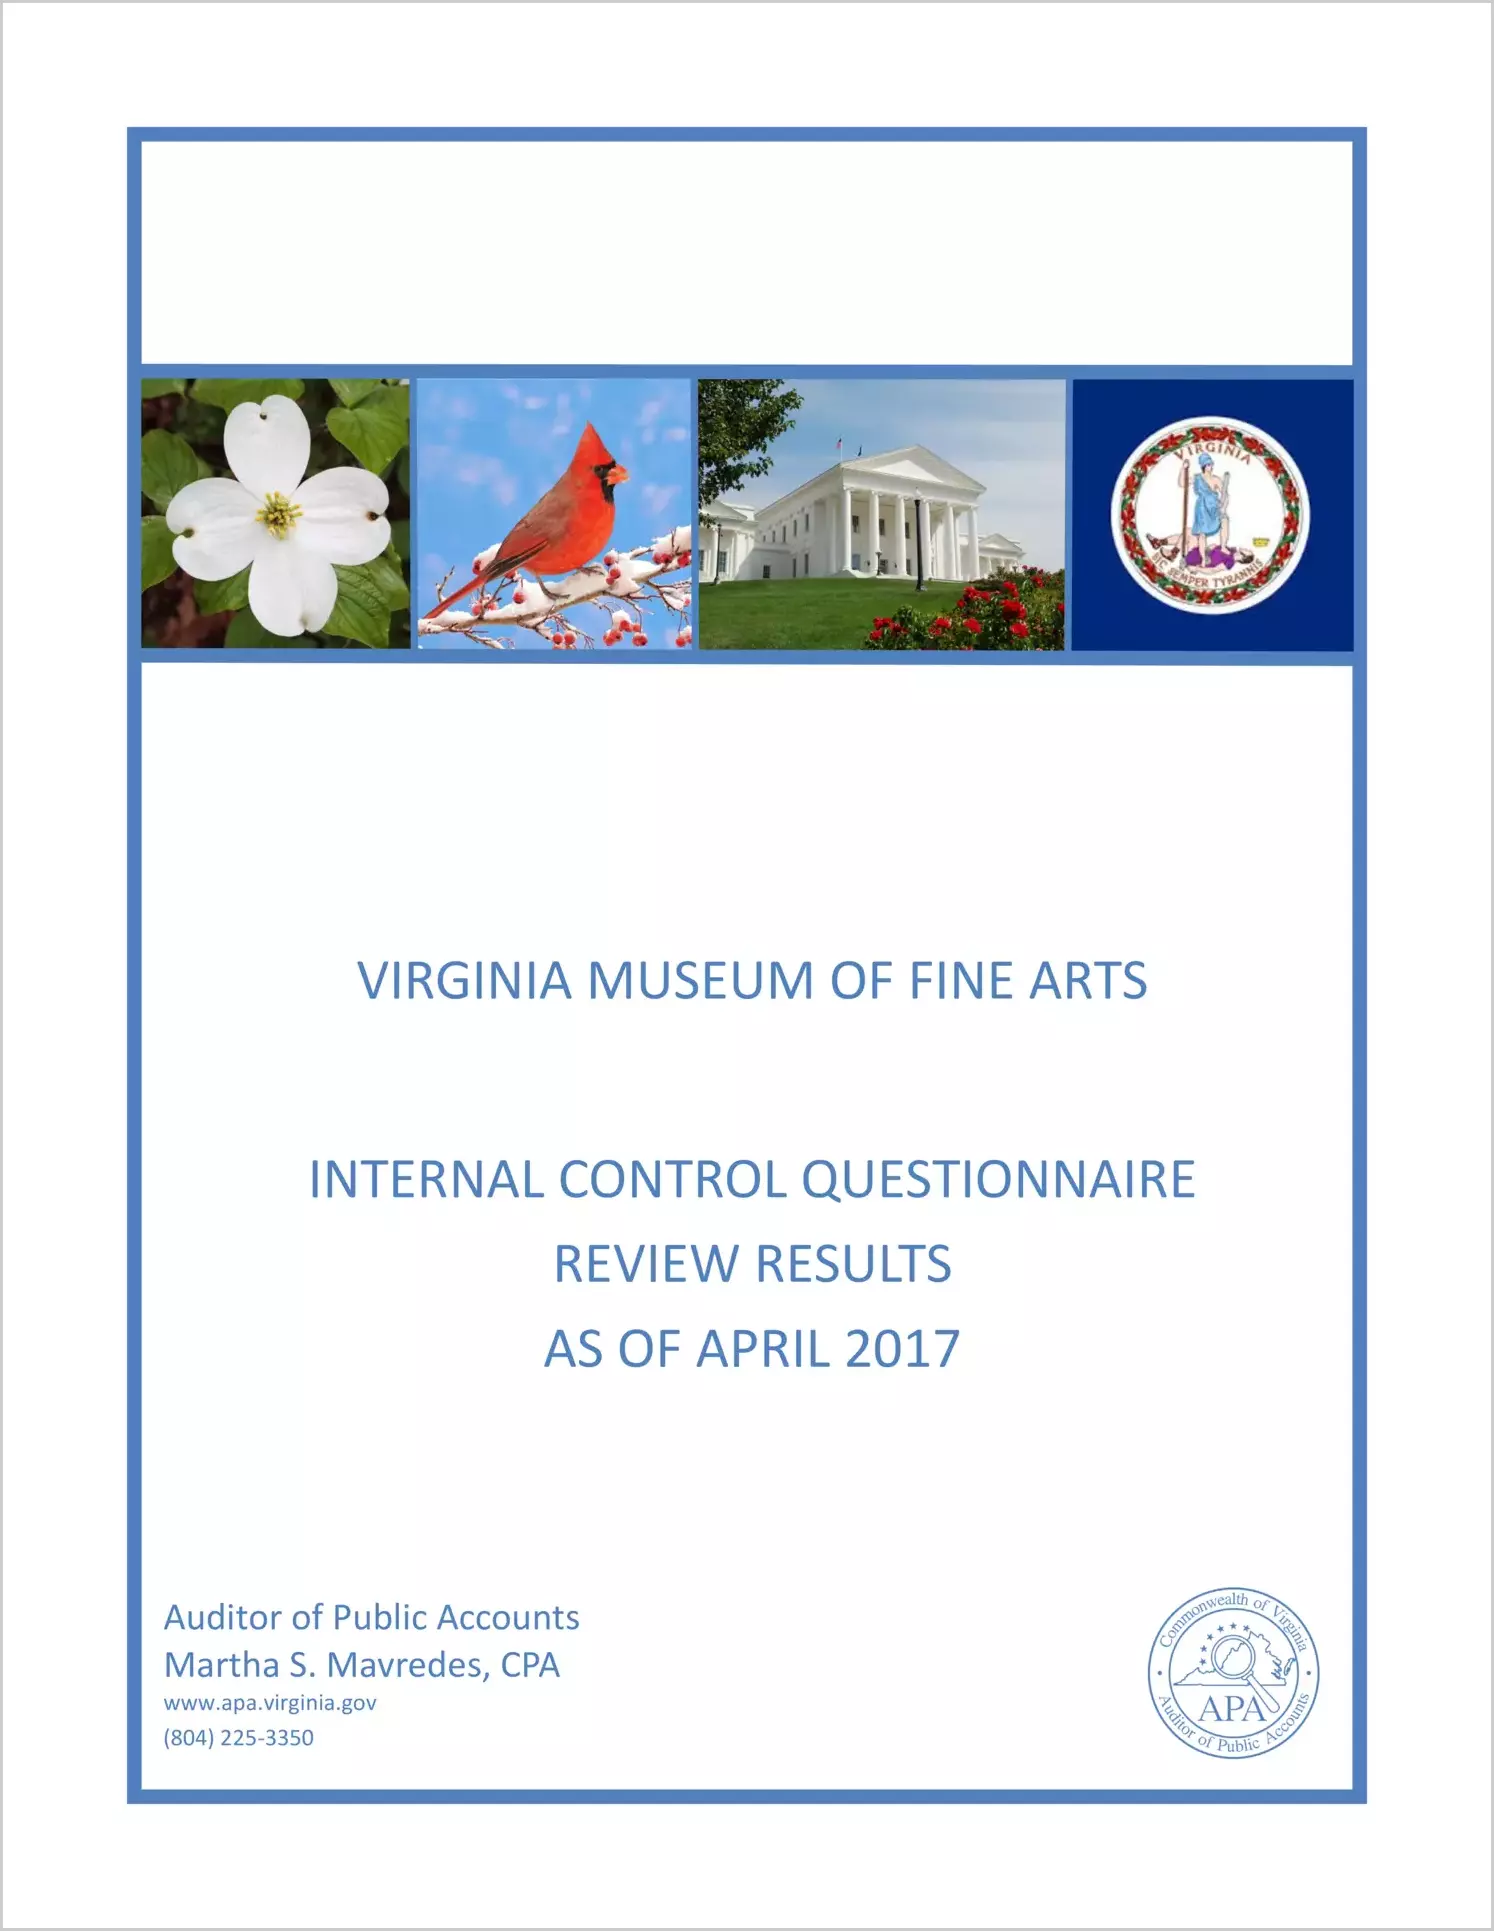 Virginia Museum of Fine Arts Internal Control Questionnaire Review as of April 2017